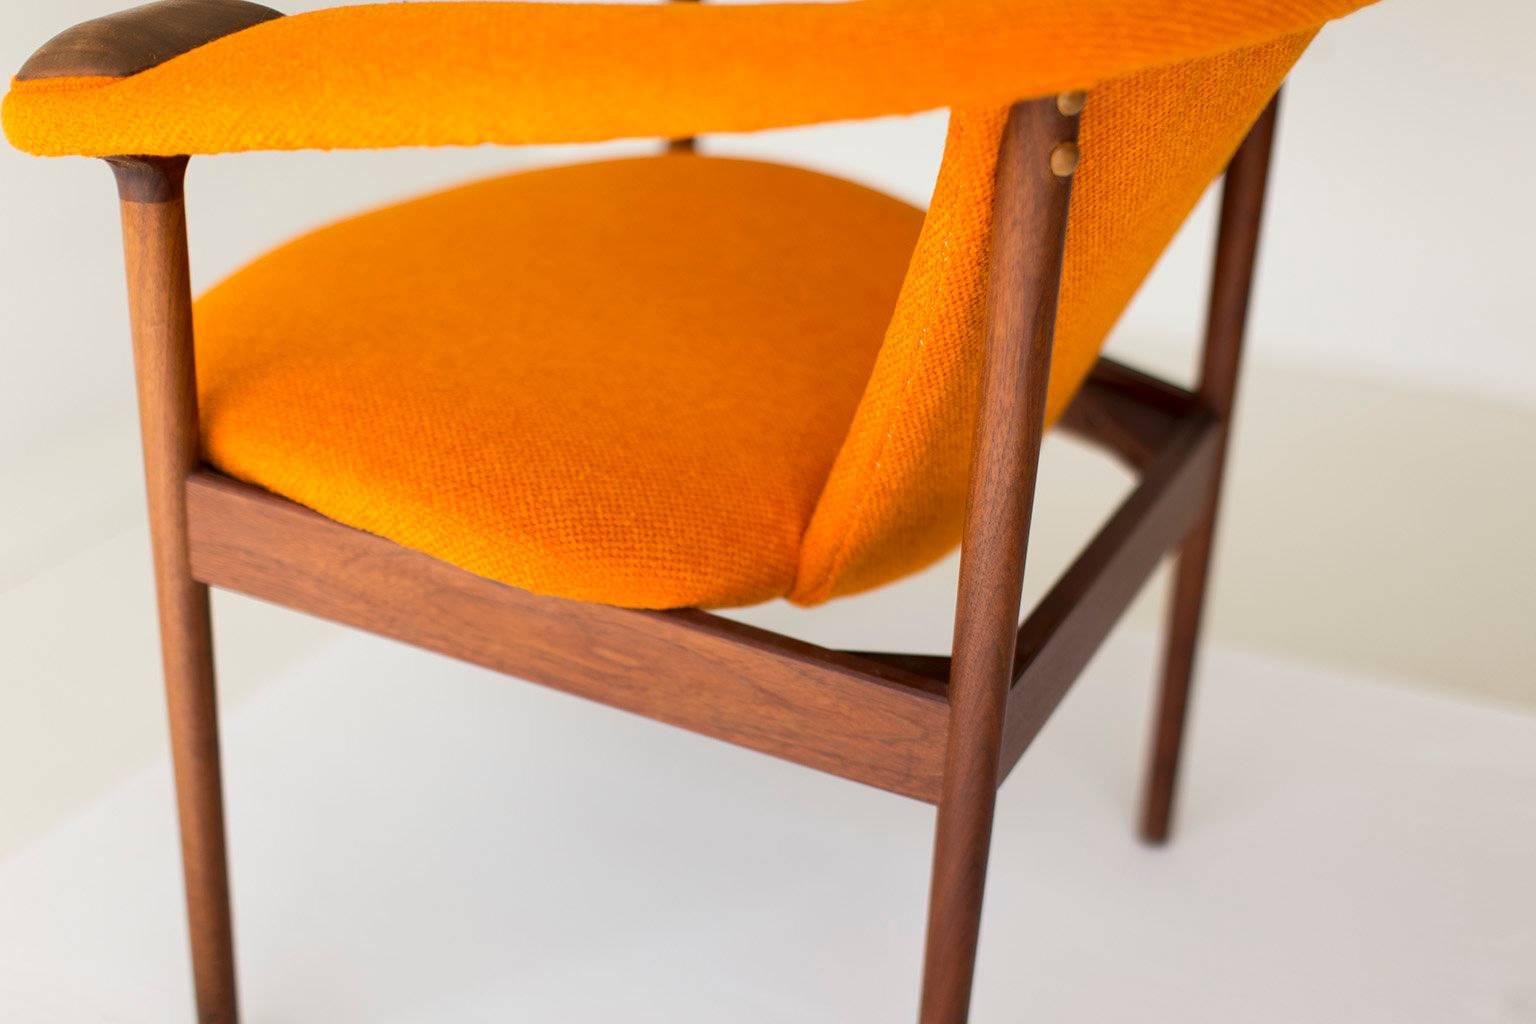 Mid-20th Century Adrian Pearsall Chair for Craft Associates Inc